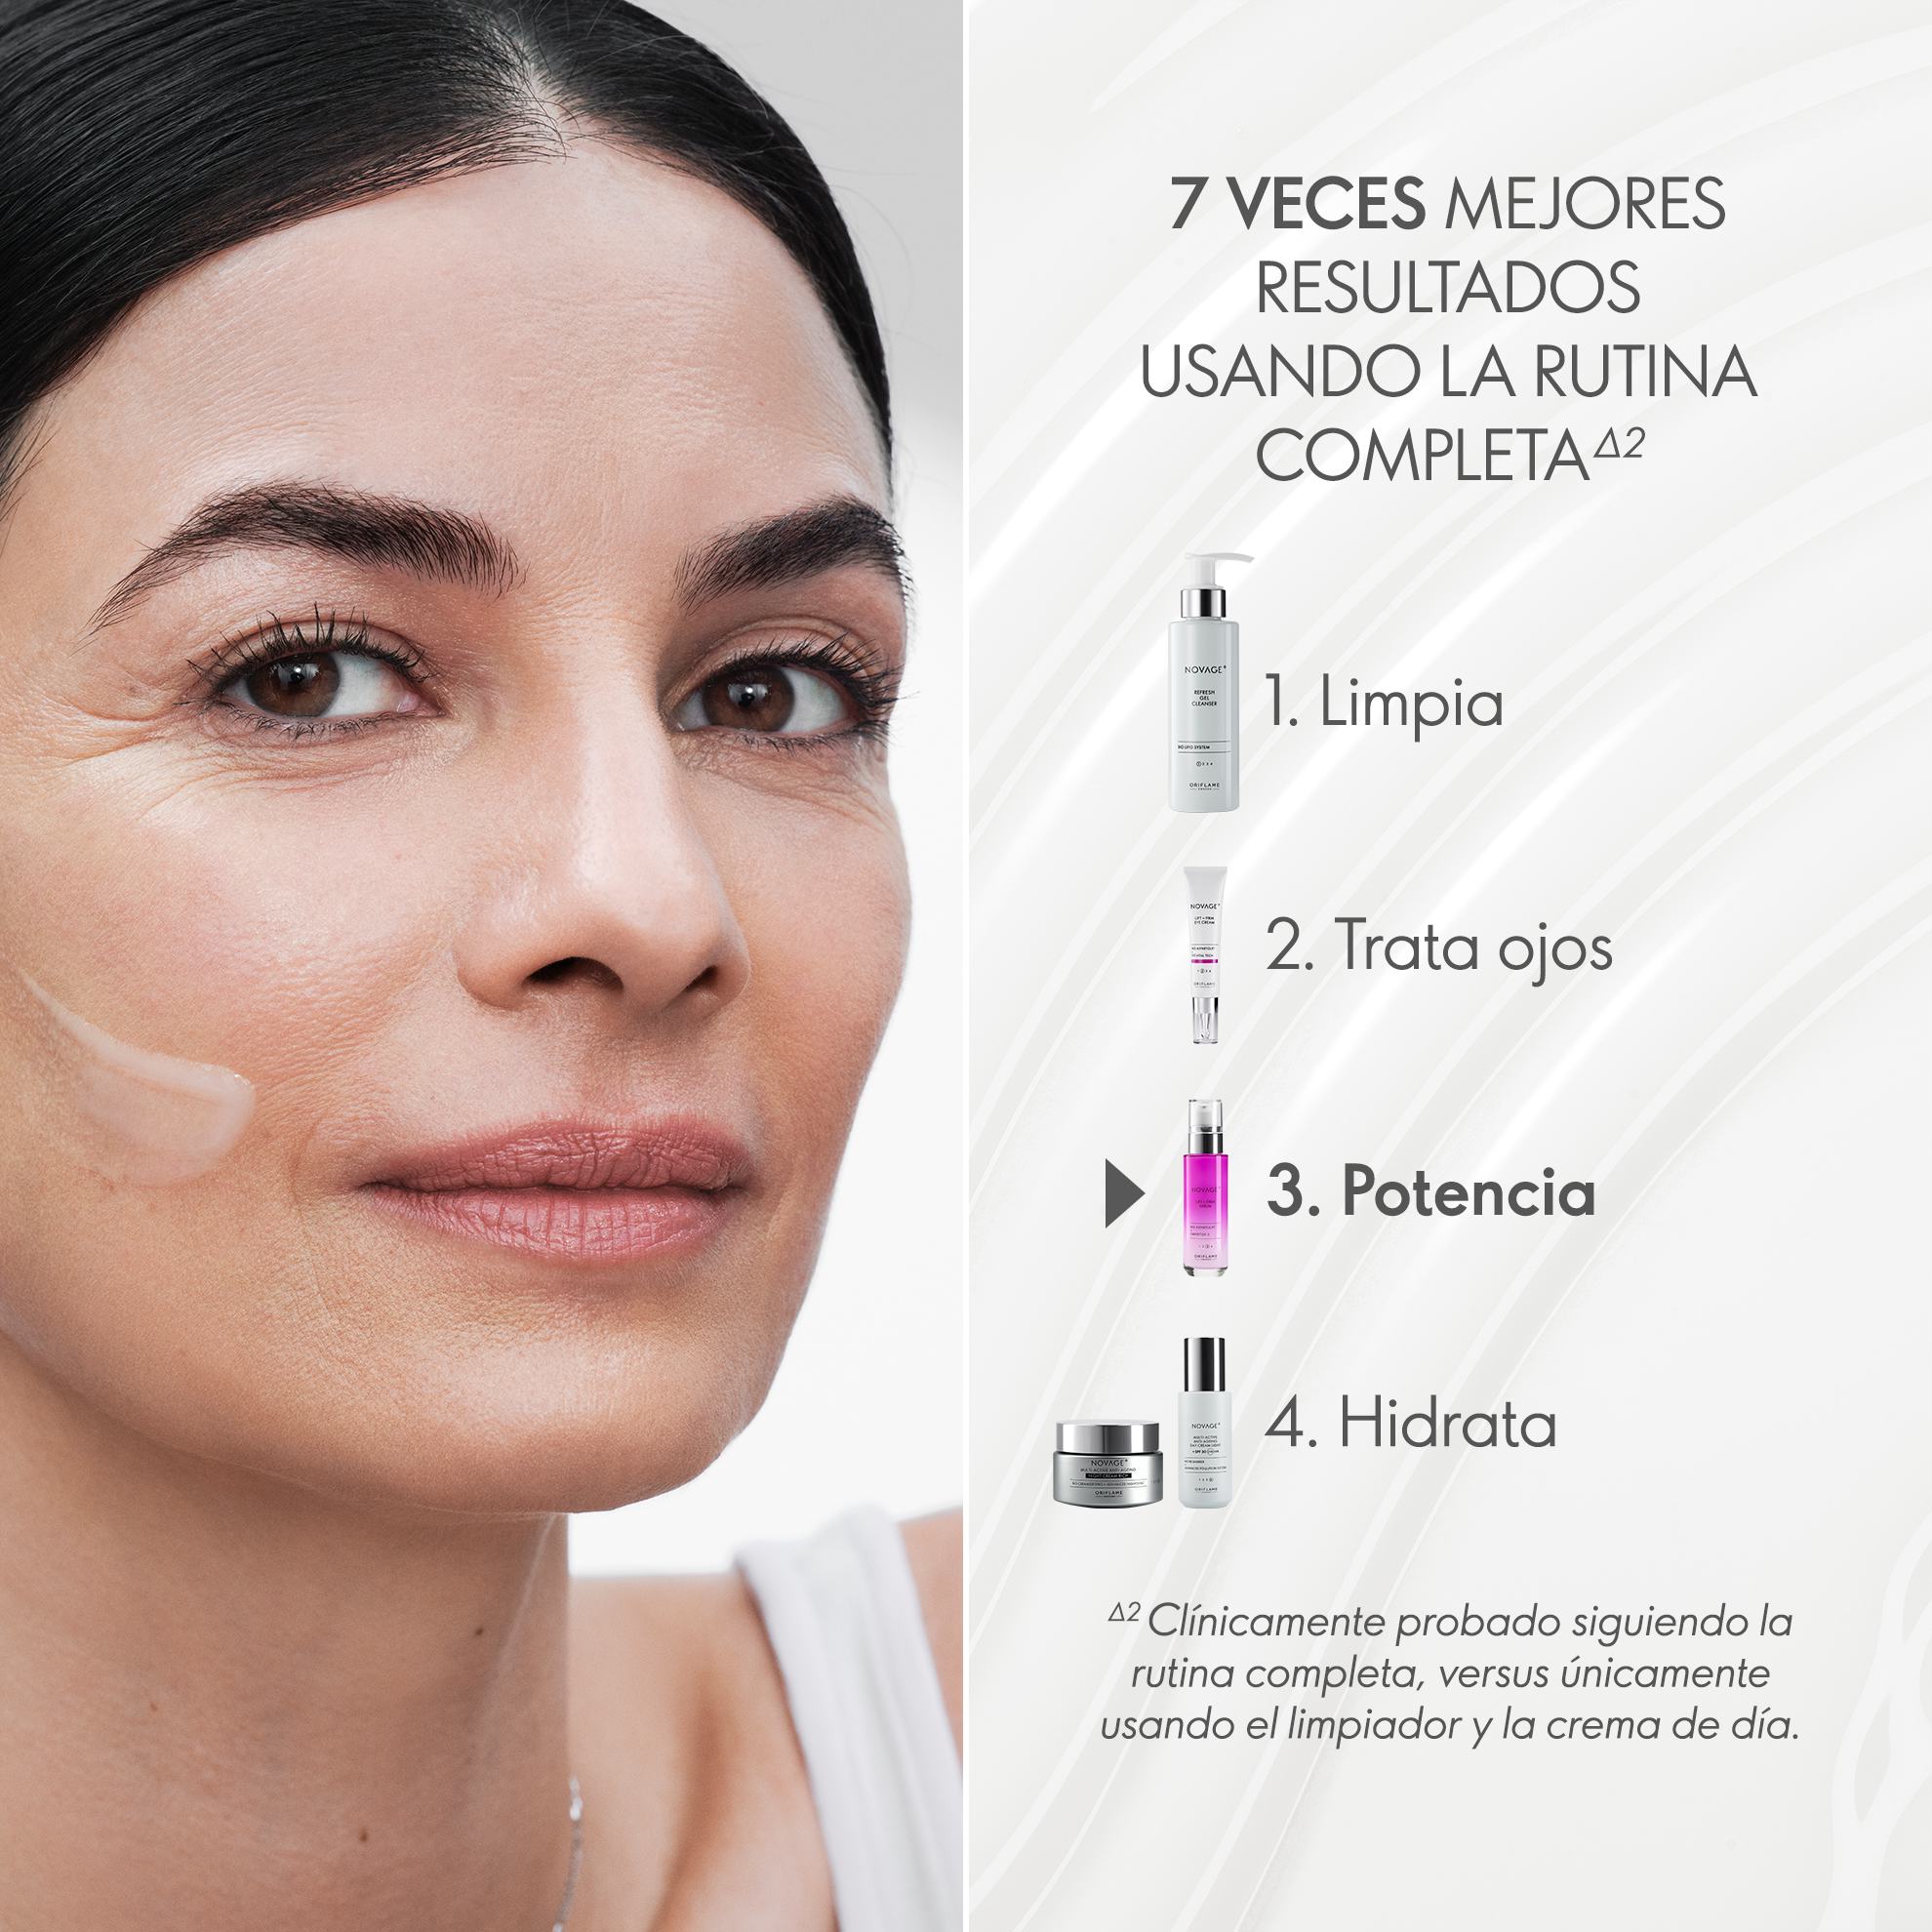 https://media-cdn.oriflame.com/productImage?externalMediaId=product-management-media%2fProducts%2f41037%2fCL%2f41037_5.png&id=18234936&version=1